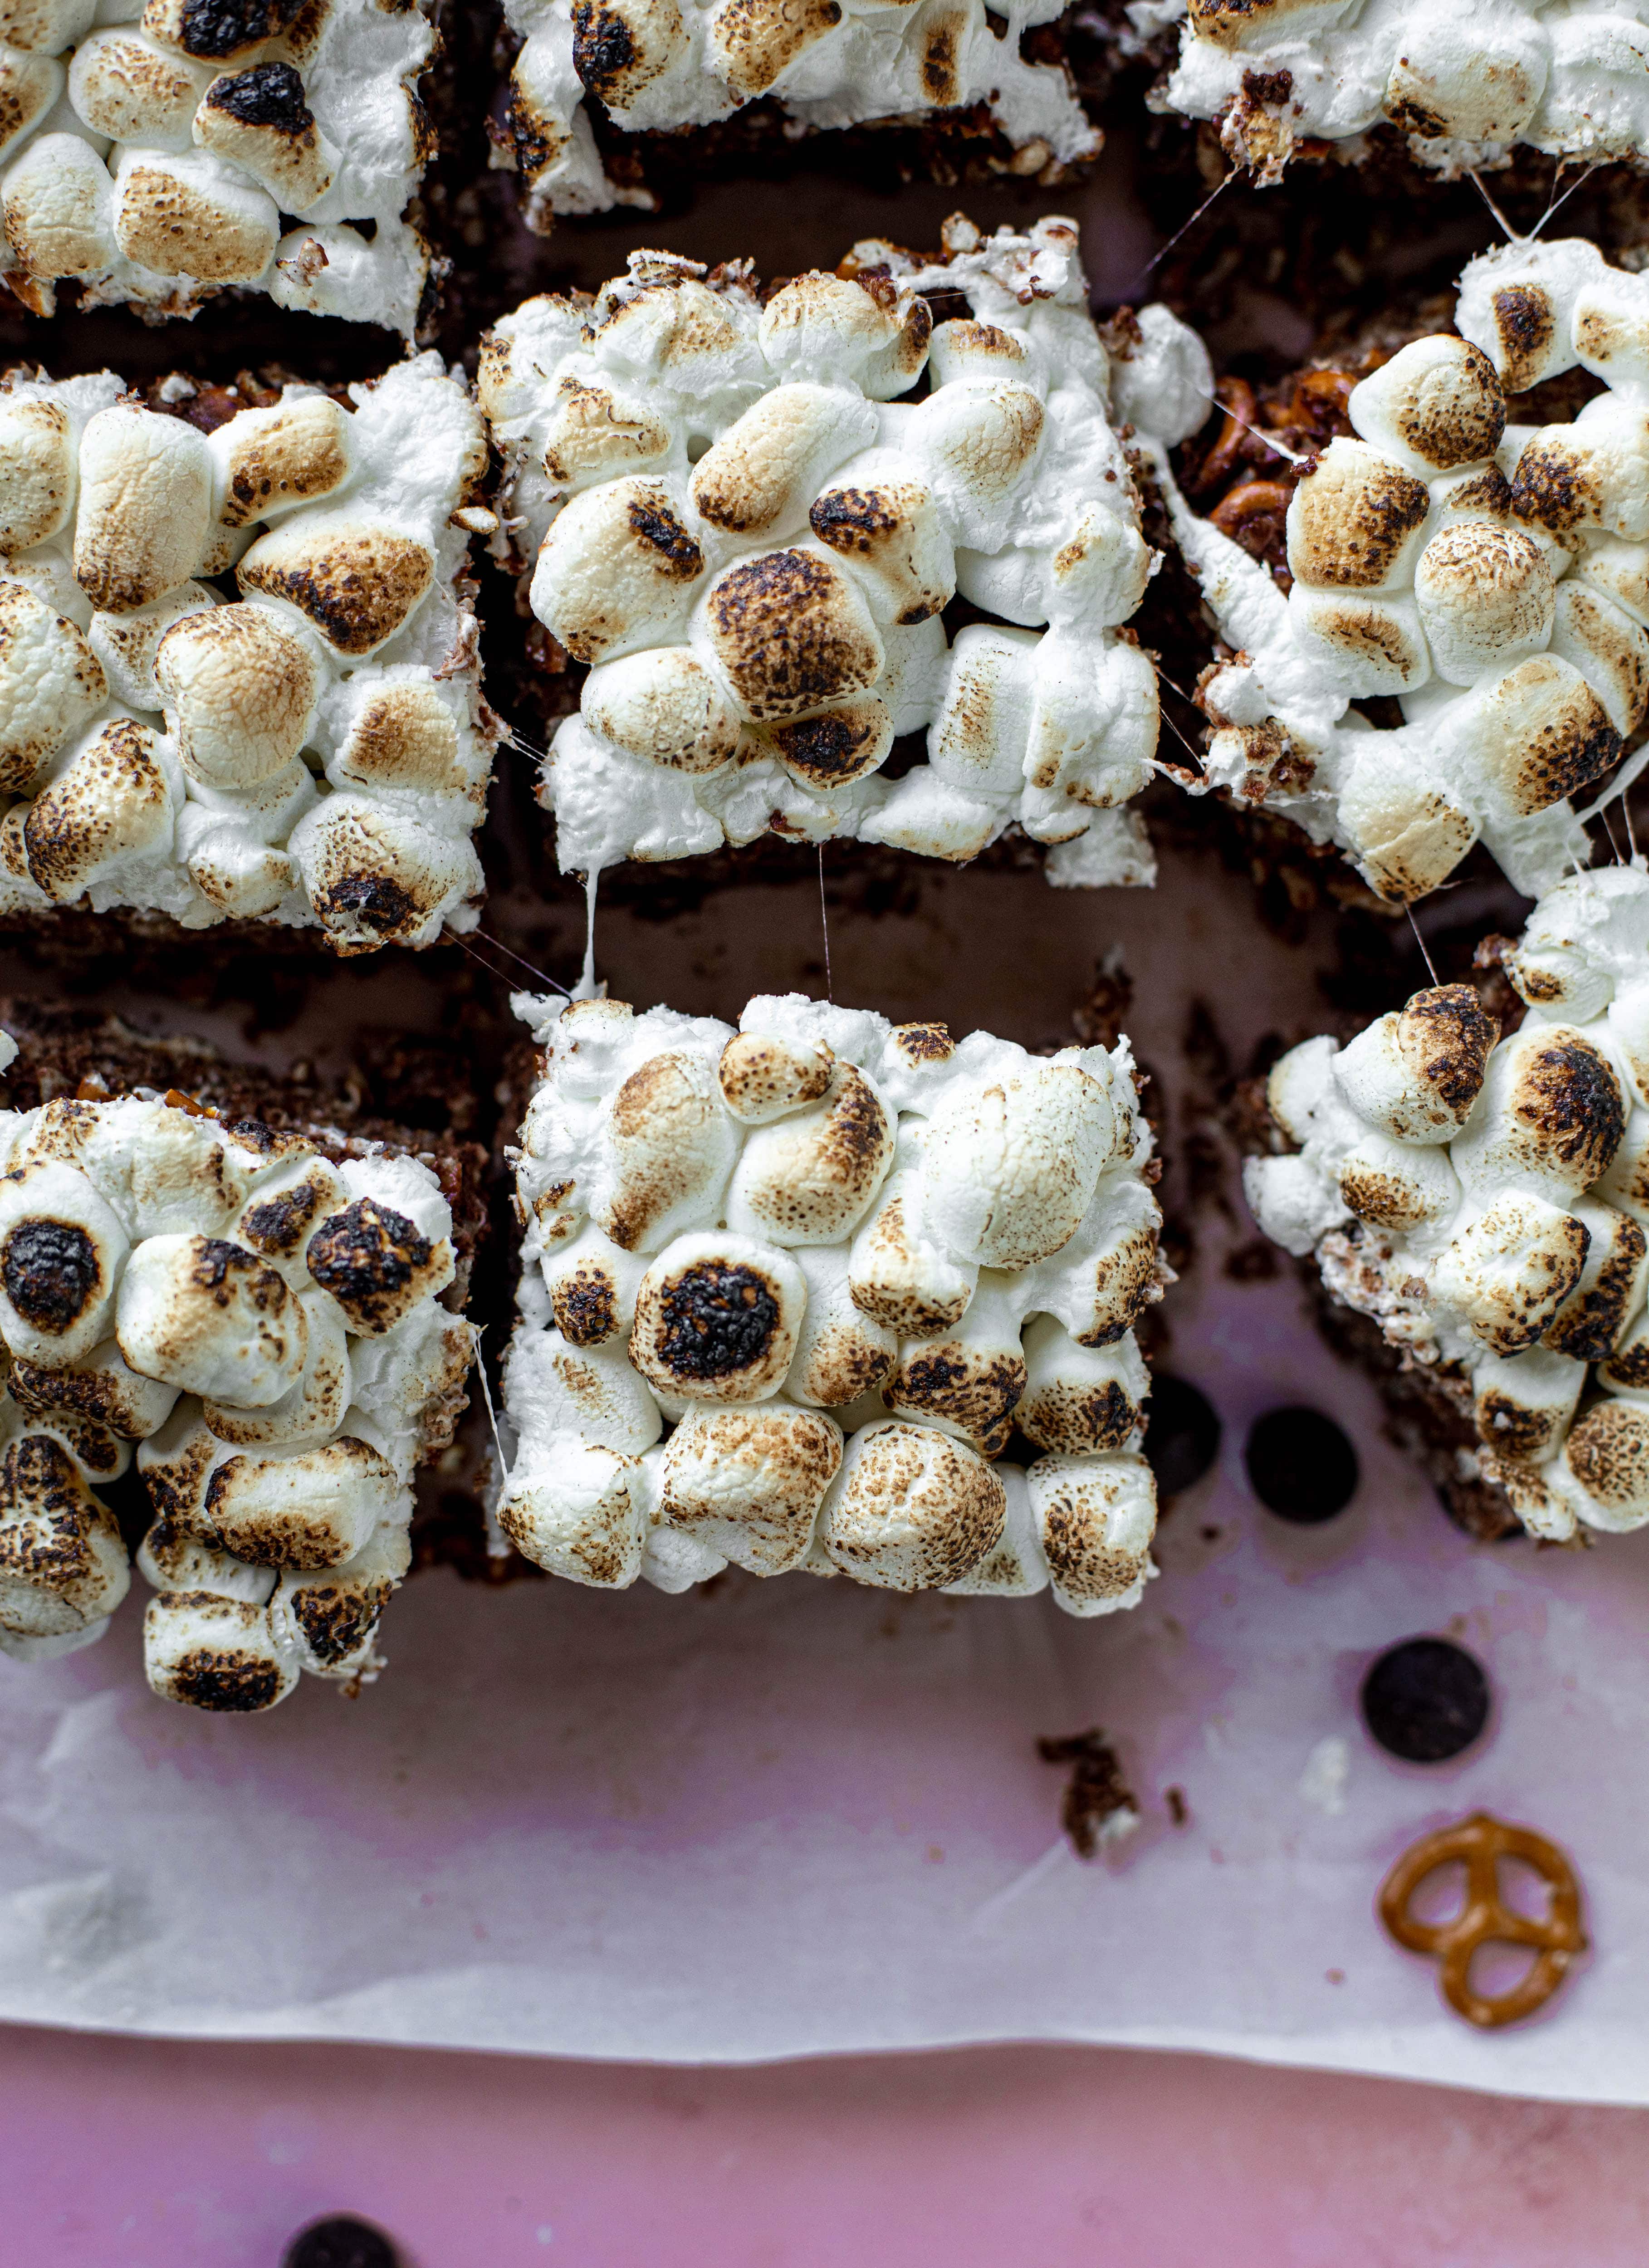 These indulgent s'mores bars are crispy and crunchy and studded with salted pretzels! Toasted marshmallow and dark chocolate make these the best treat ever!